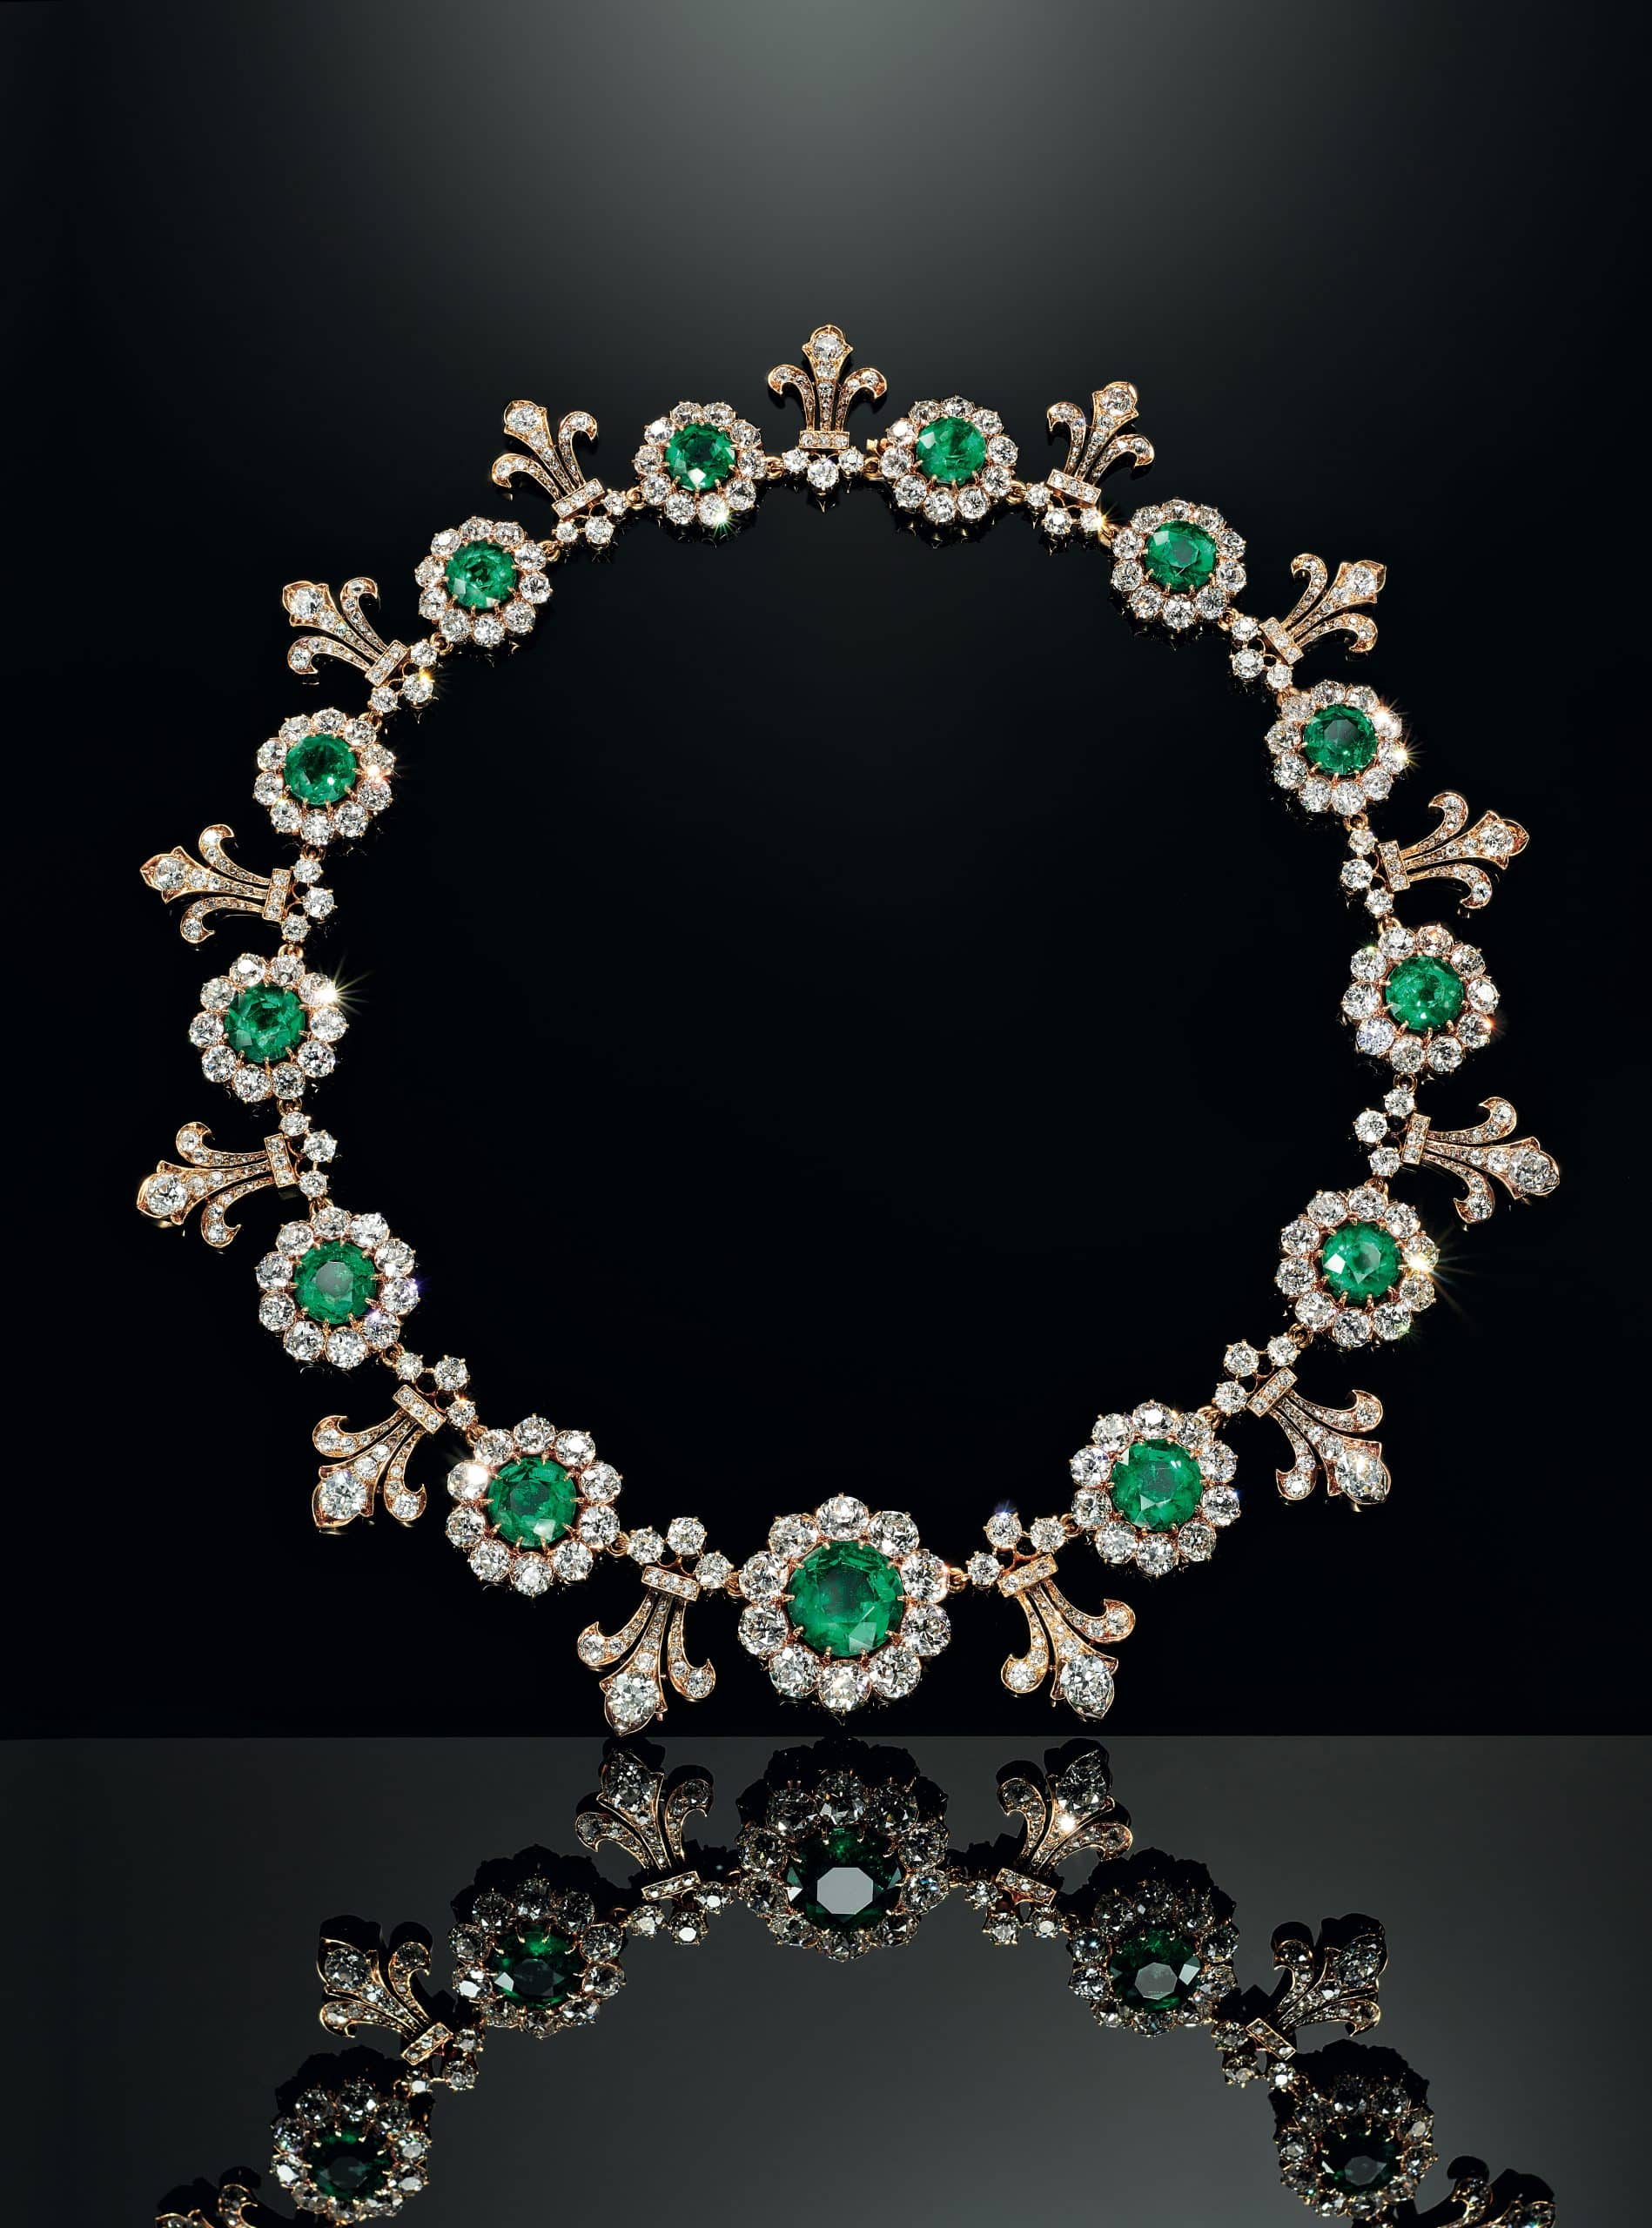 The Sparkling Legacy of Tiffany & Co. Explained, One Jewel at a Time